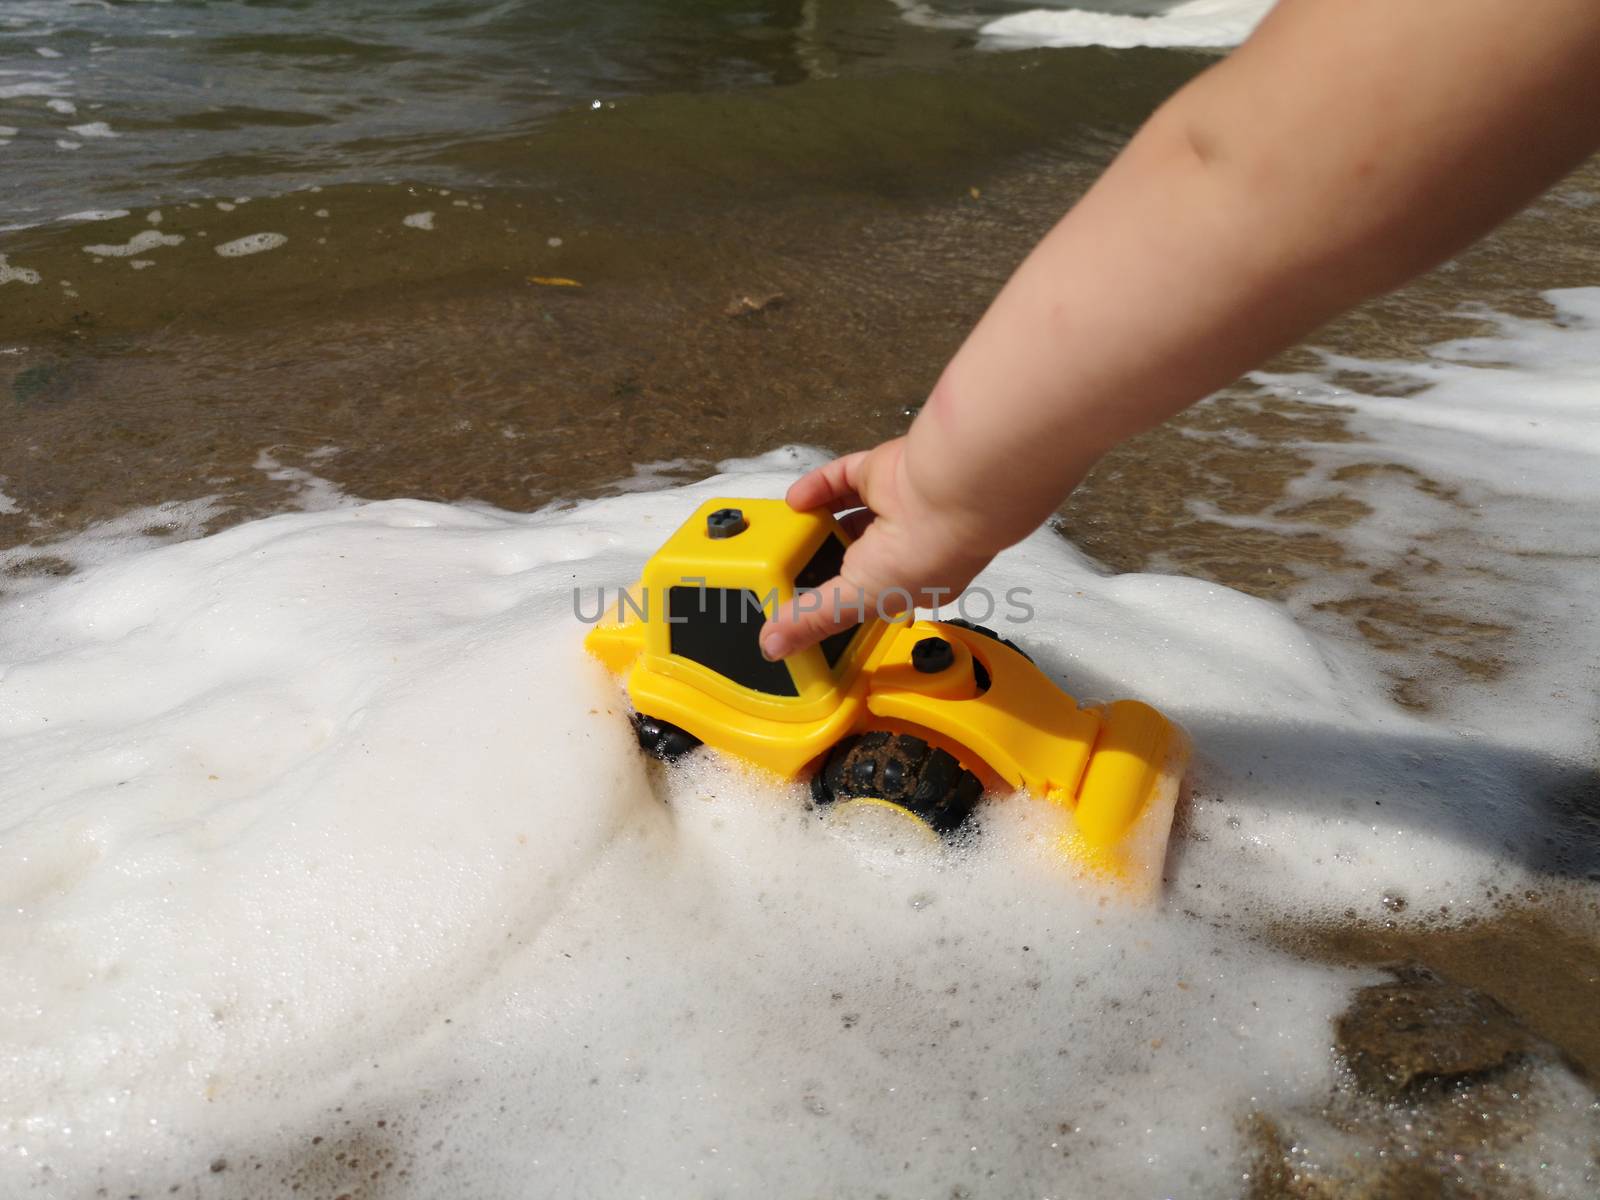  A hand of little boy with a bright yellow toy car in the foam of the lake.  by galinasharapova